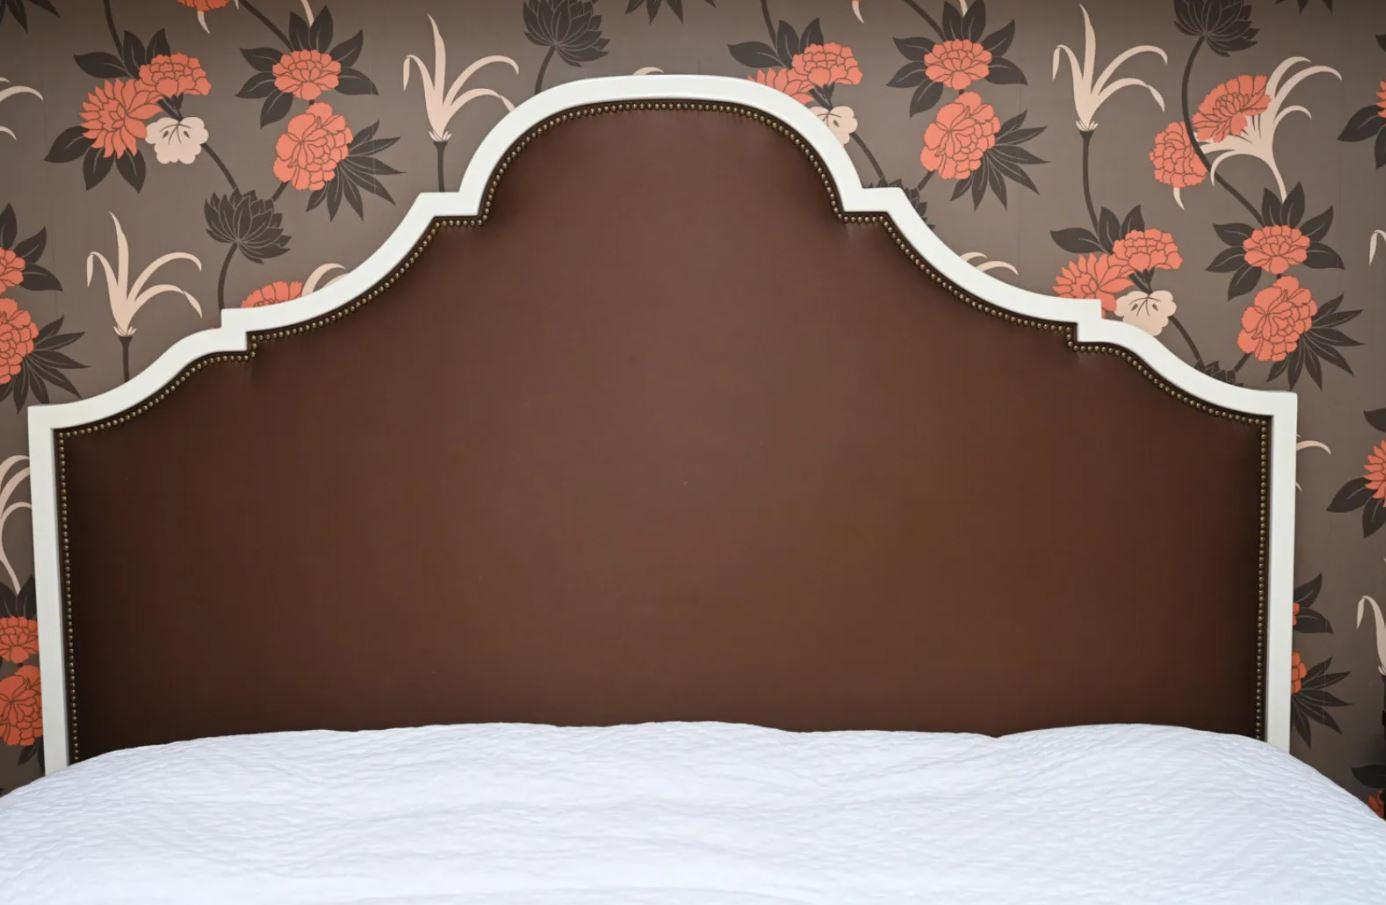 White lacquered shaped wood upholstered king size headboard from Hickory Chair. Upholstered in matte coffee satin with nailhead trim.